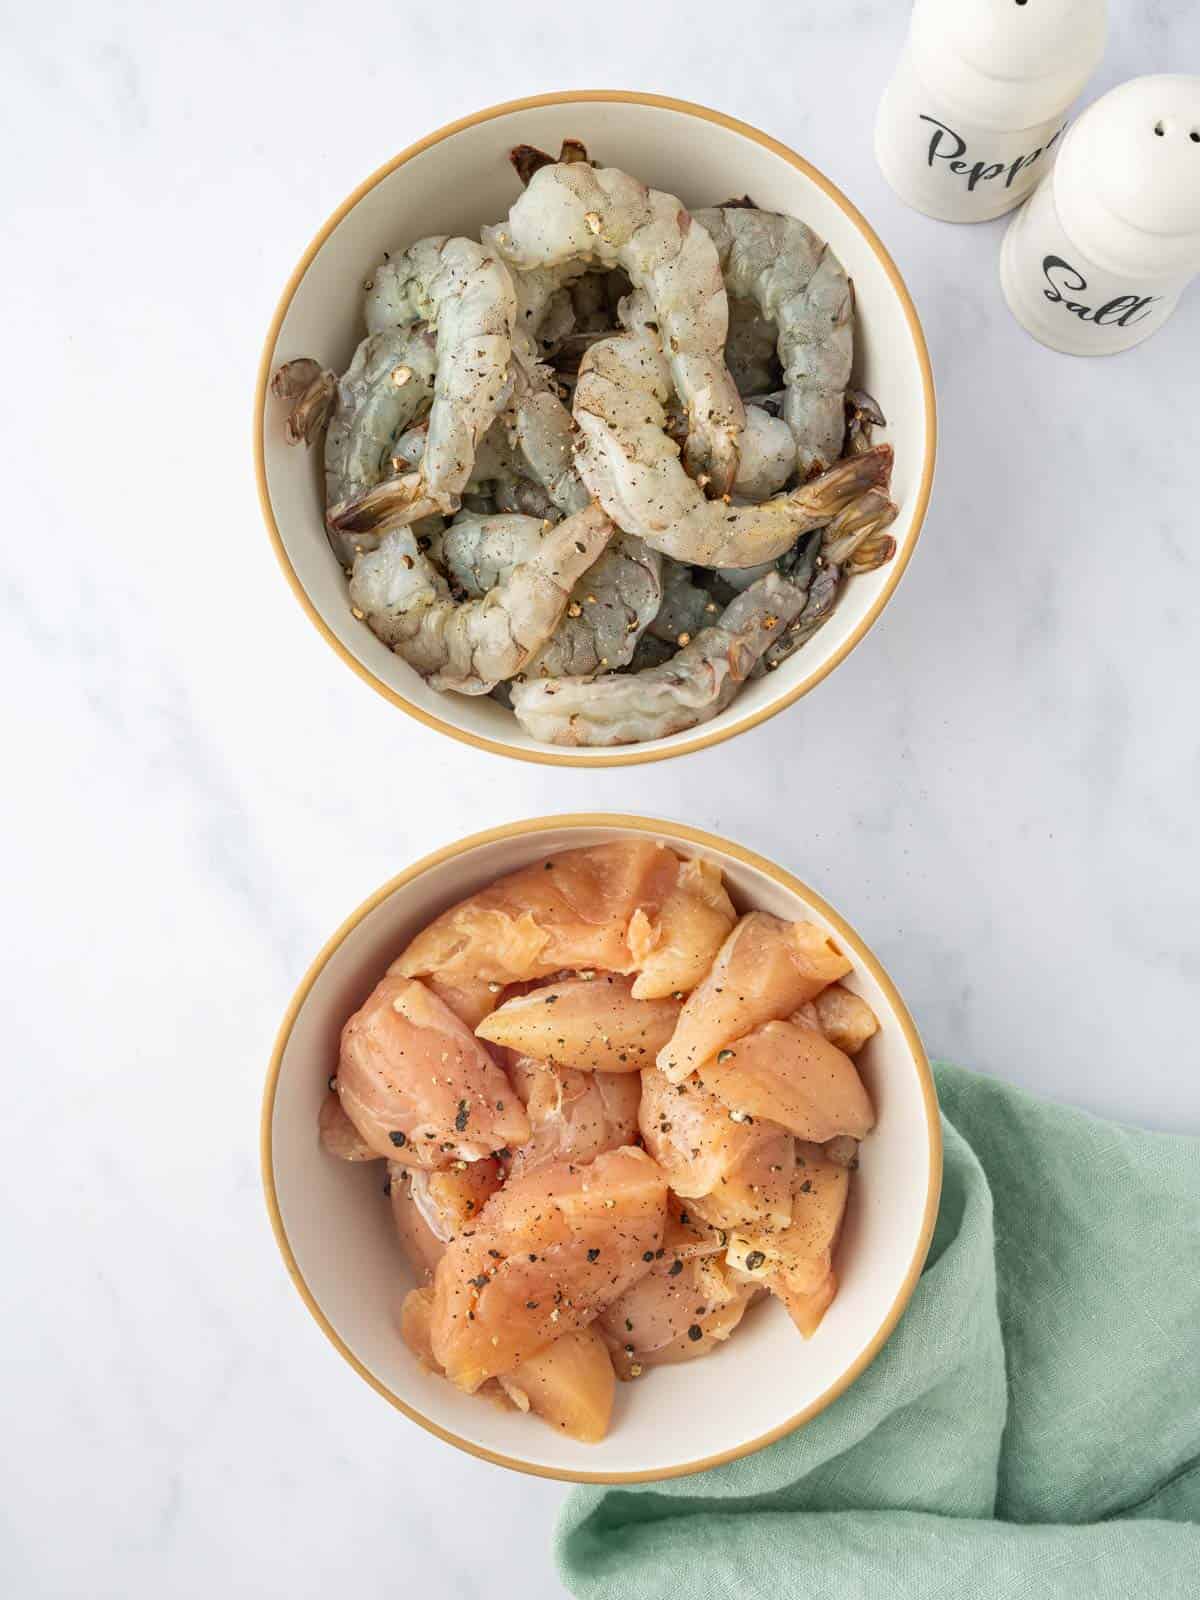 Raw shrimp and chicken are seasoned with salt and pepper.